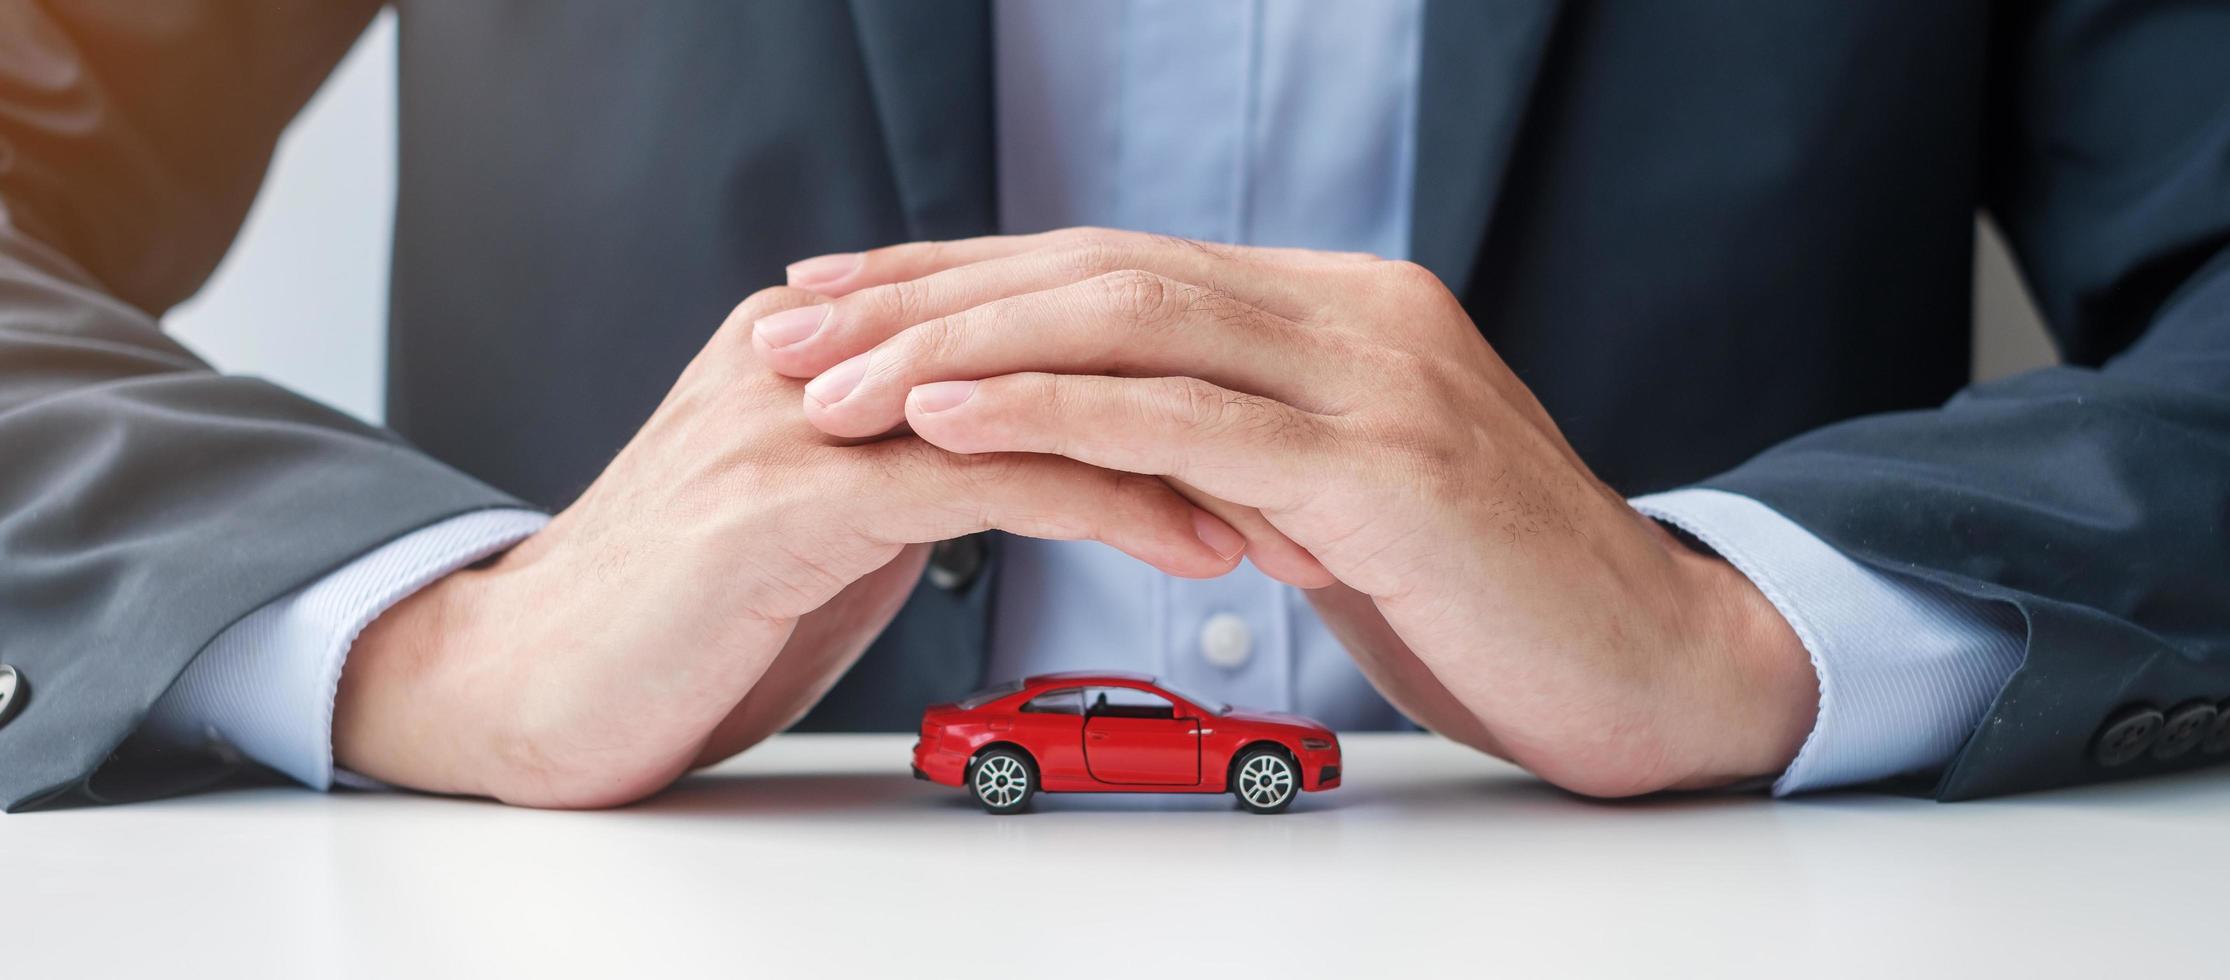 Businessman hand cover or protection red car toy on table. Car insurance, warranty, repair, Financial, banking and money concept photo